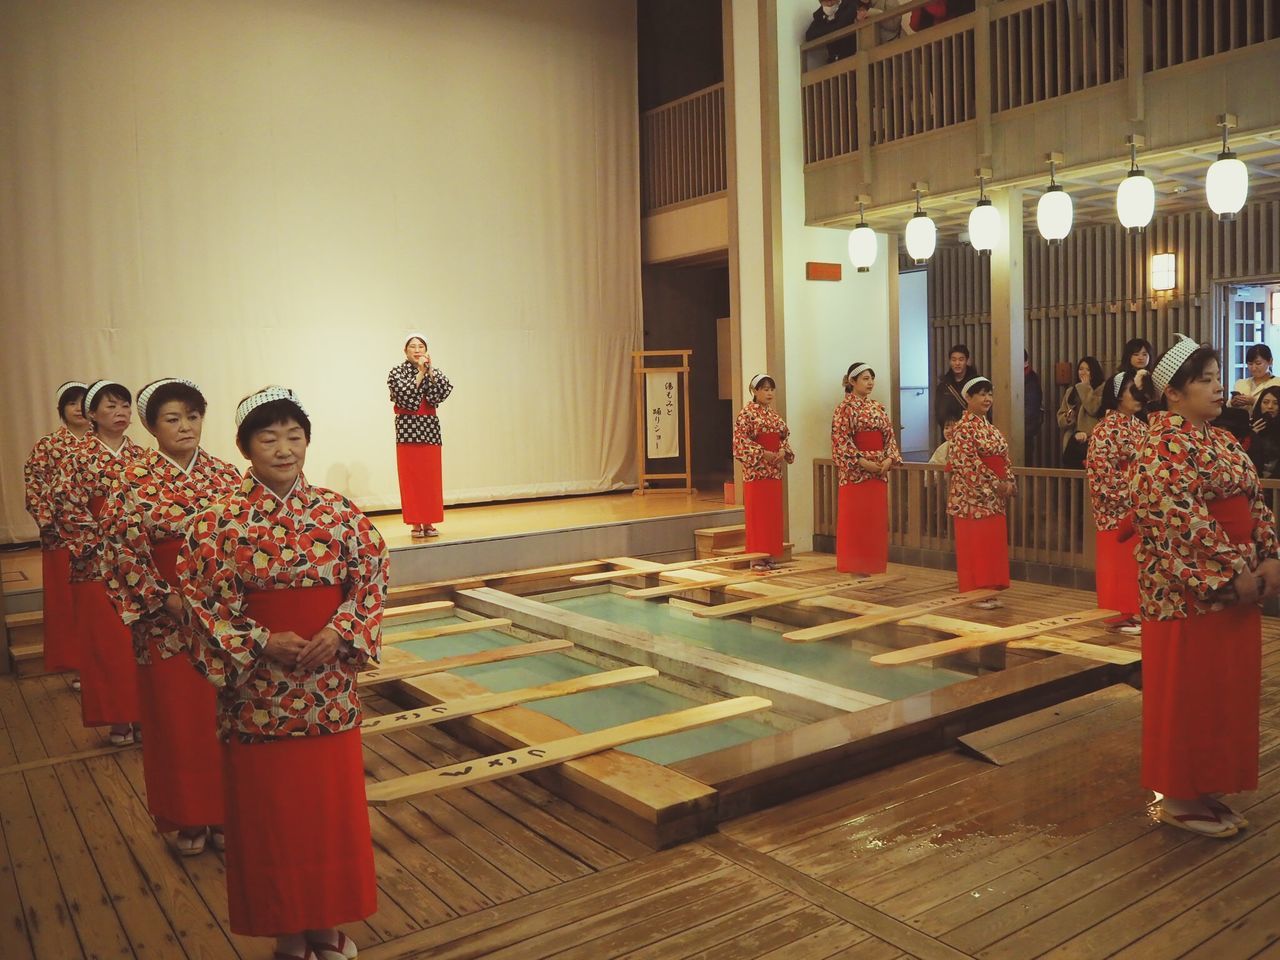 group of people, women, traditional clothing, real people, adult, indoors, rear view, men, togetherness, architecture, clothing, people, built structure, flooring, lifestyles, standing, group, religion, architectural column